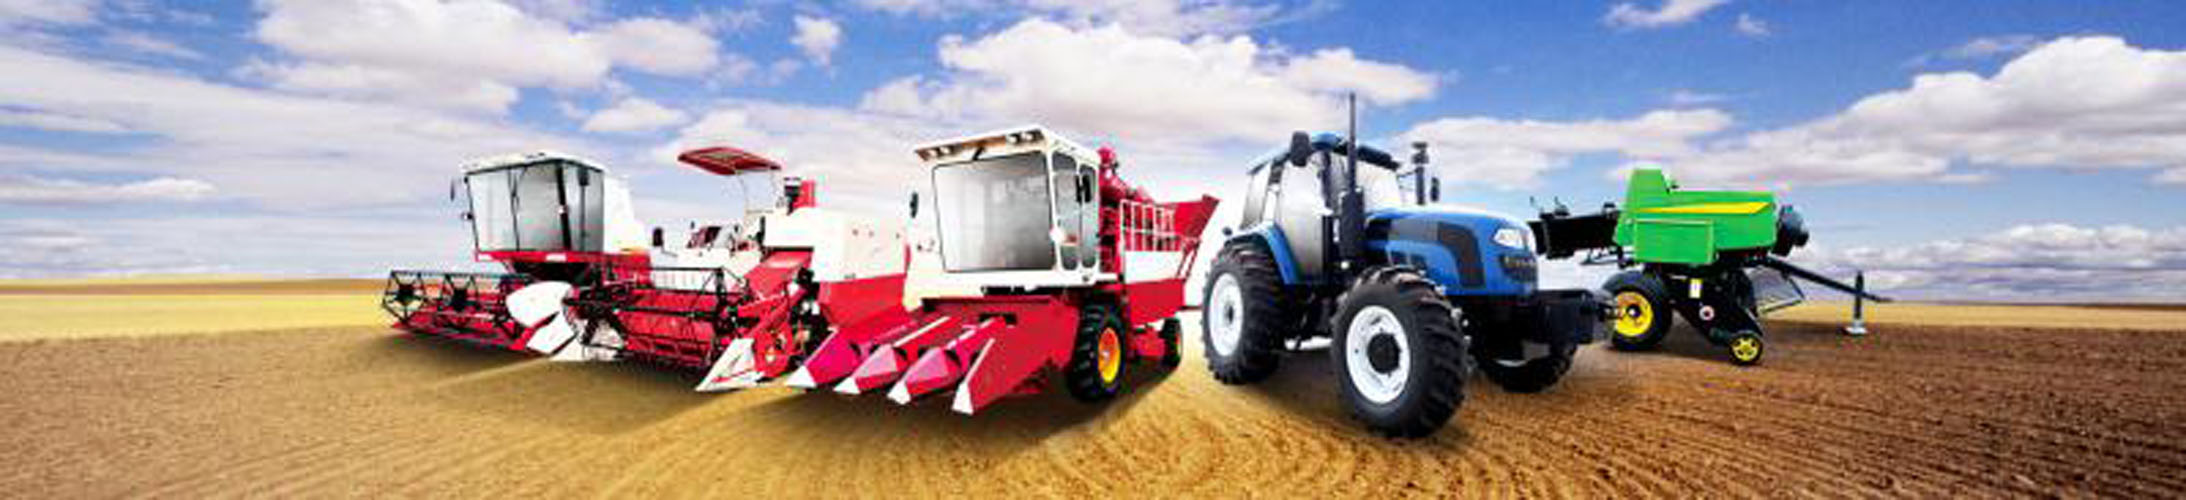 Agricultural machinery products